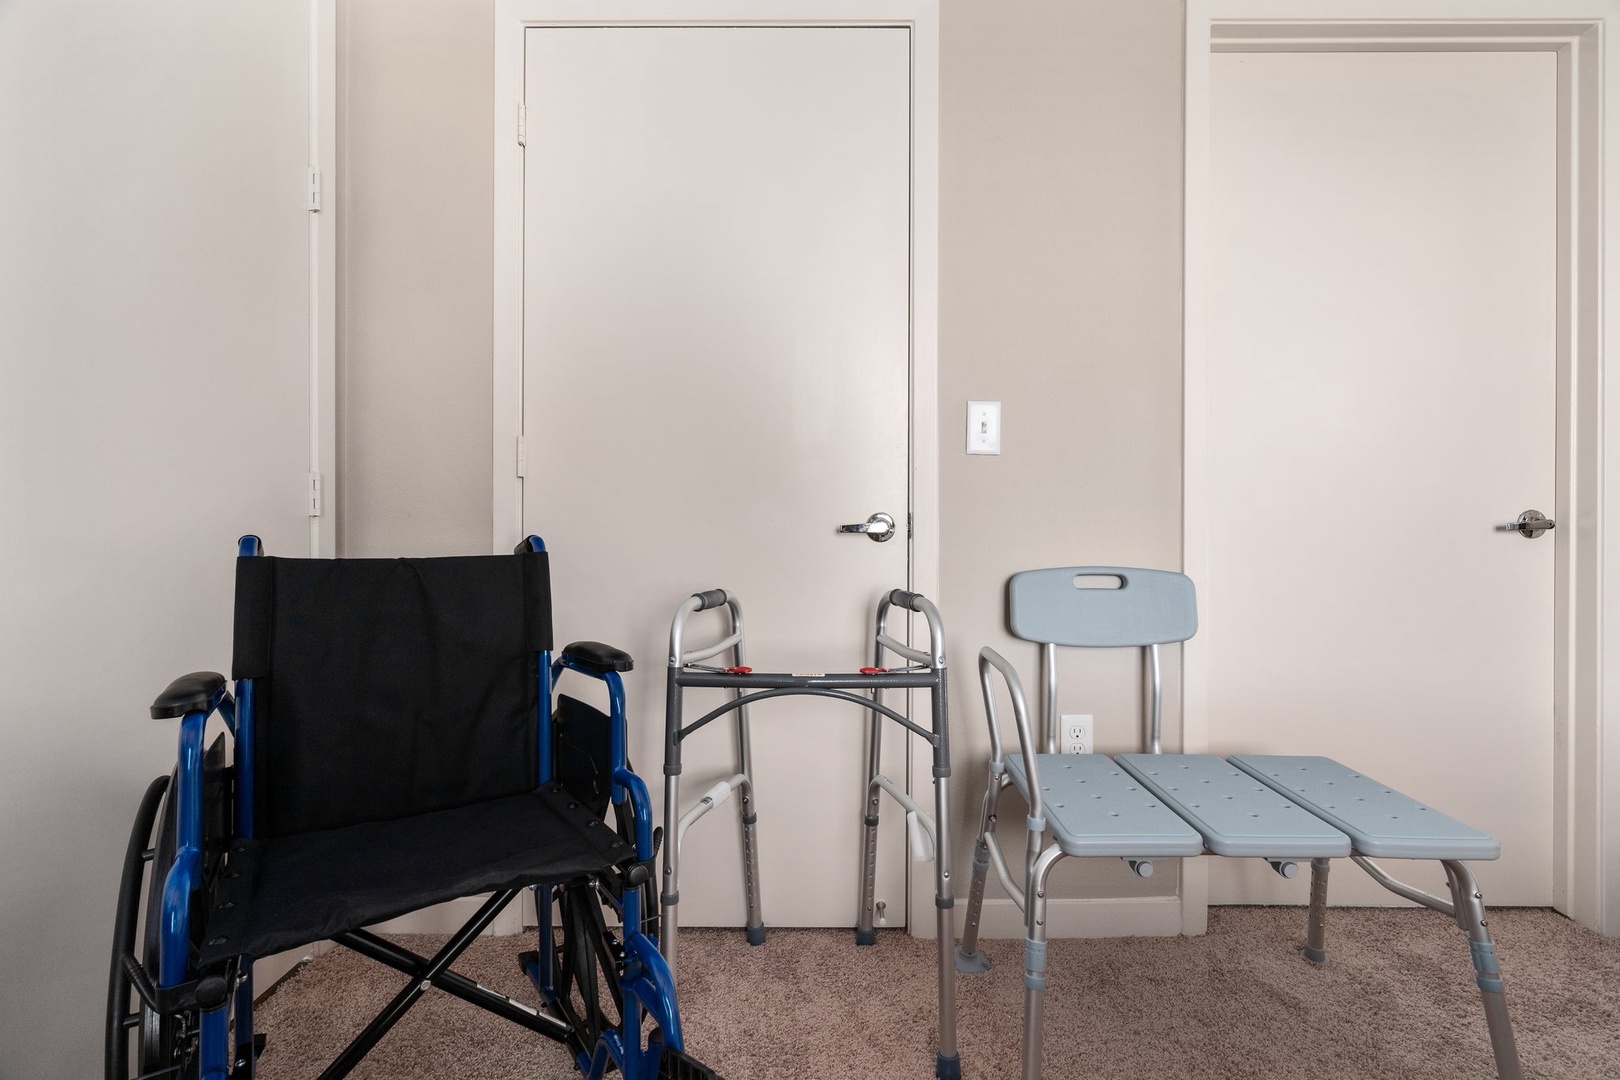 Ensuring accessibility for all: Wheelchair, walker, and shower chair available upon request.